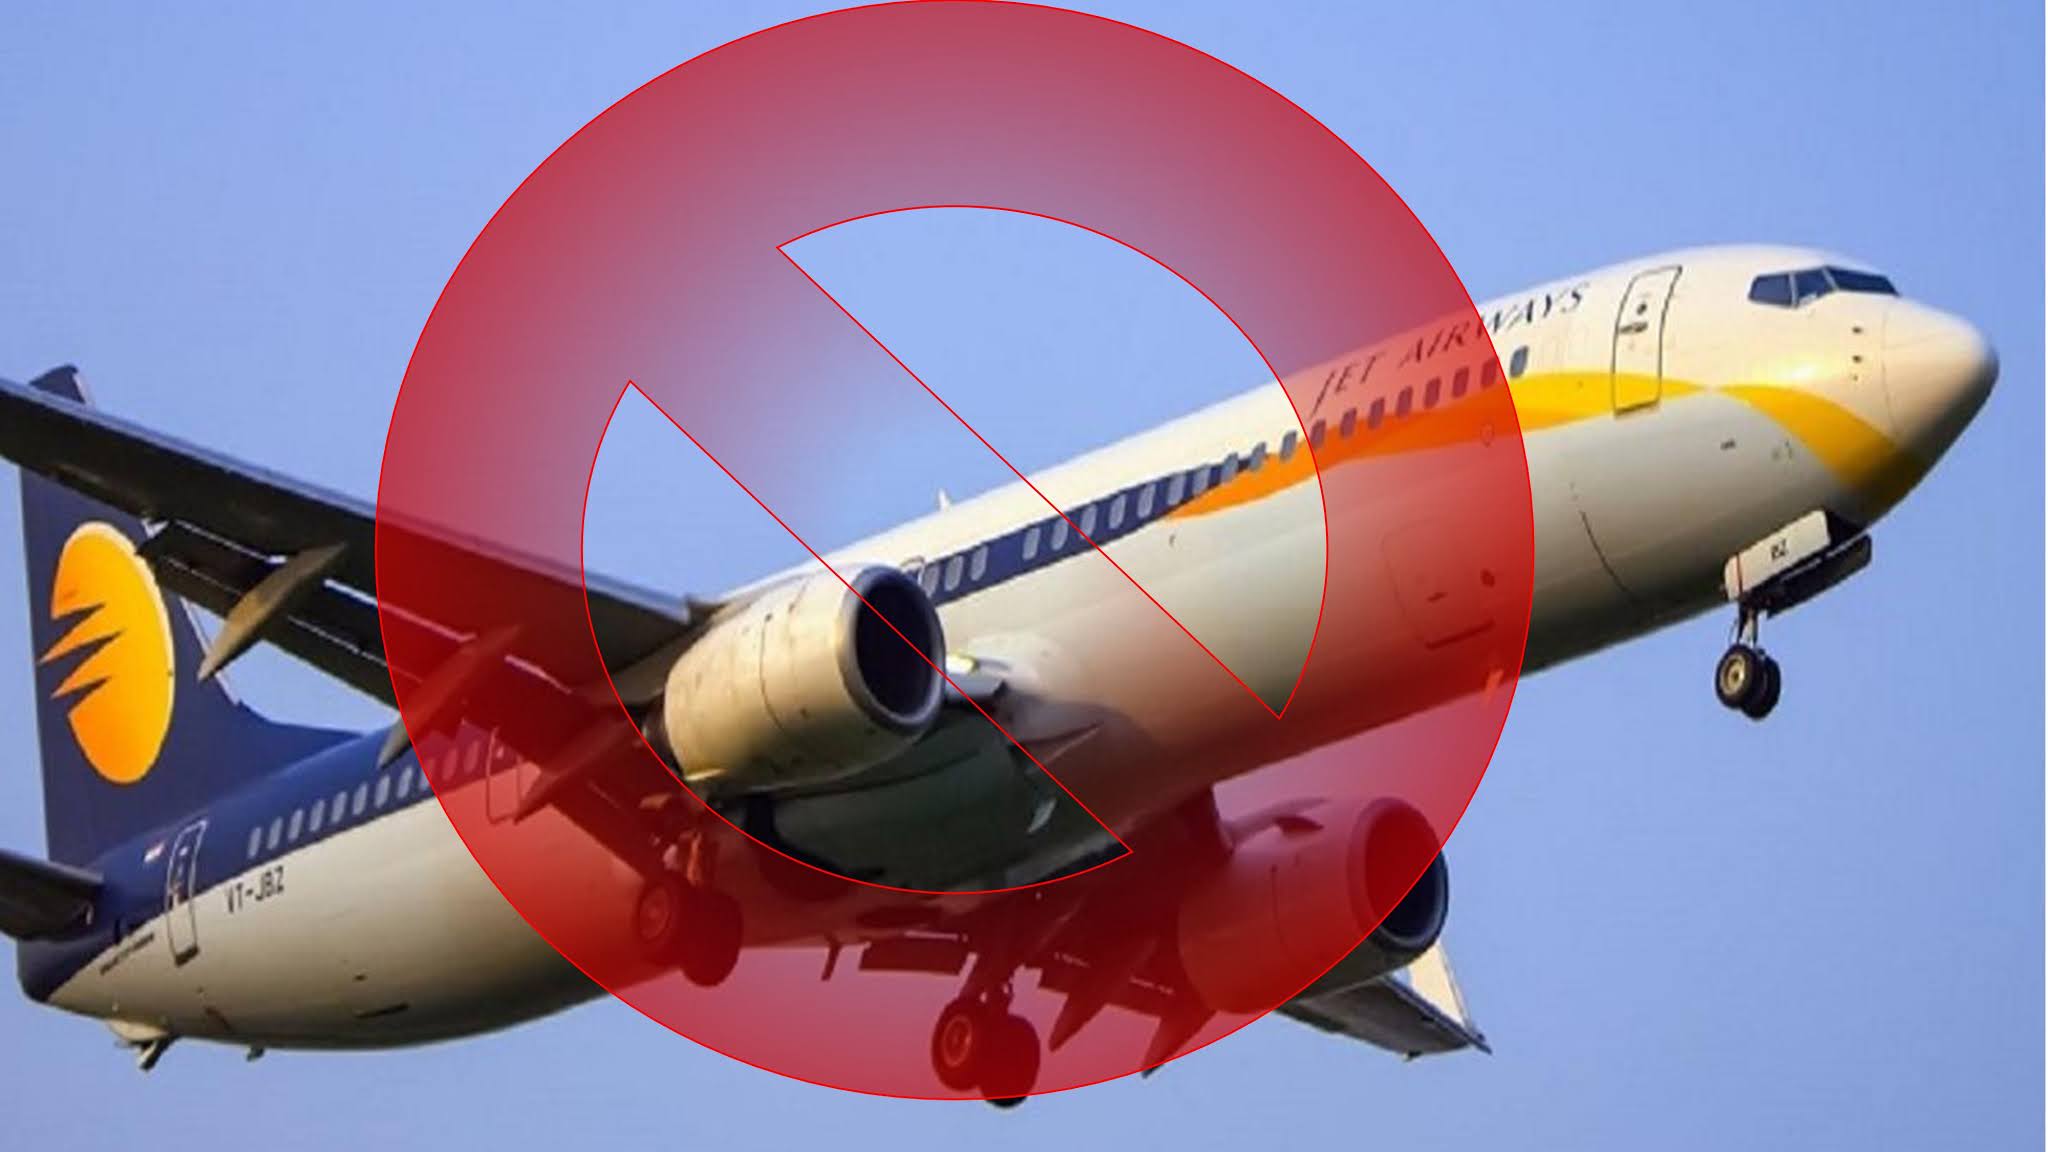 no flight  of jetairways flying, due to insolvency and bankruptcy